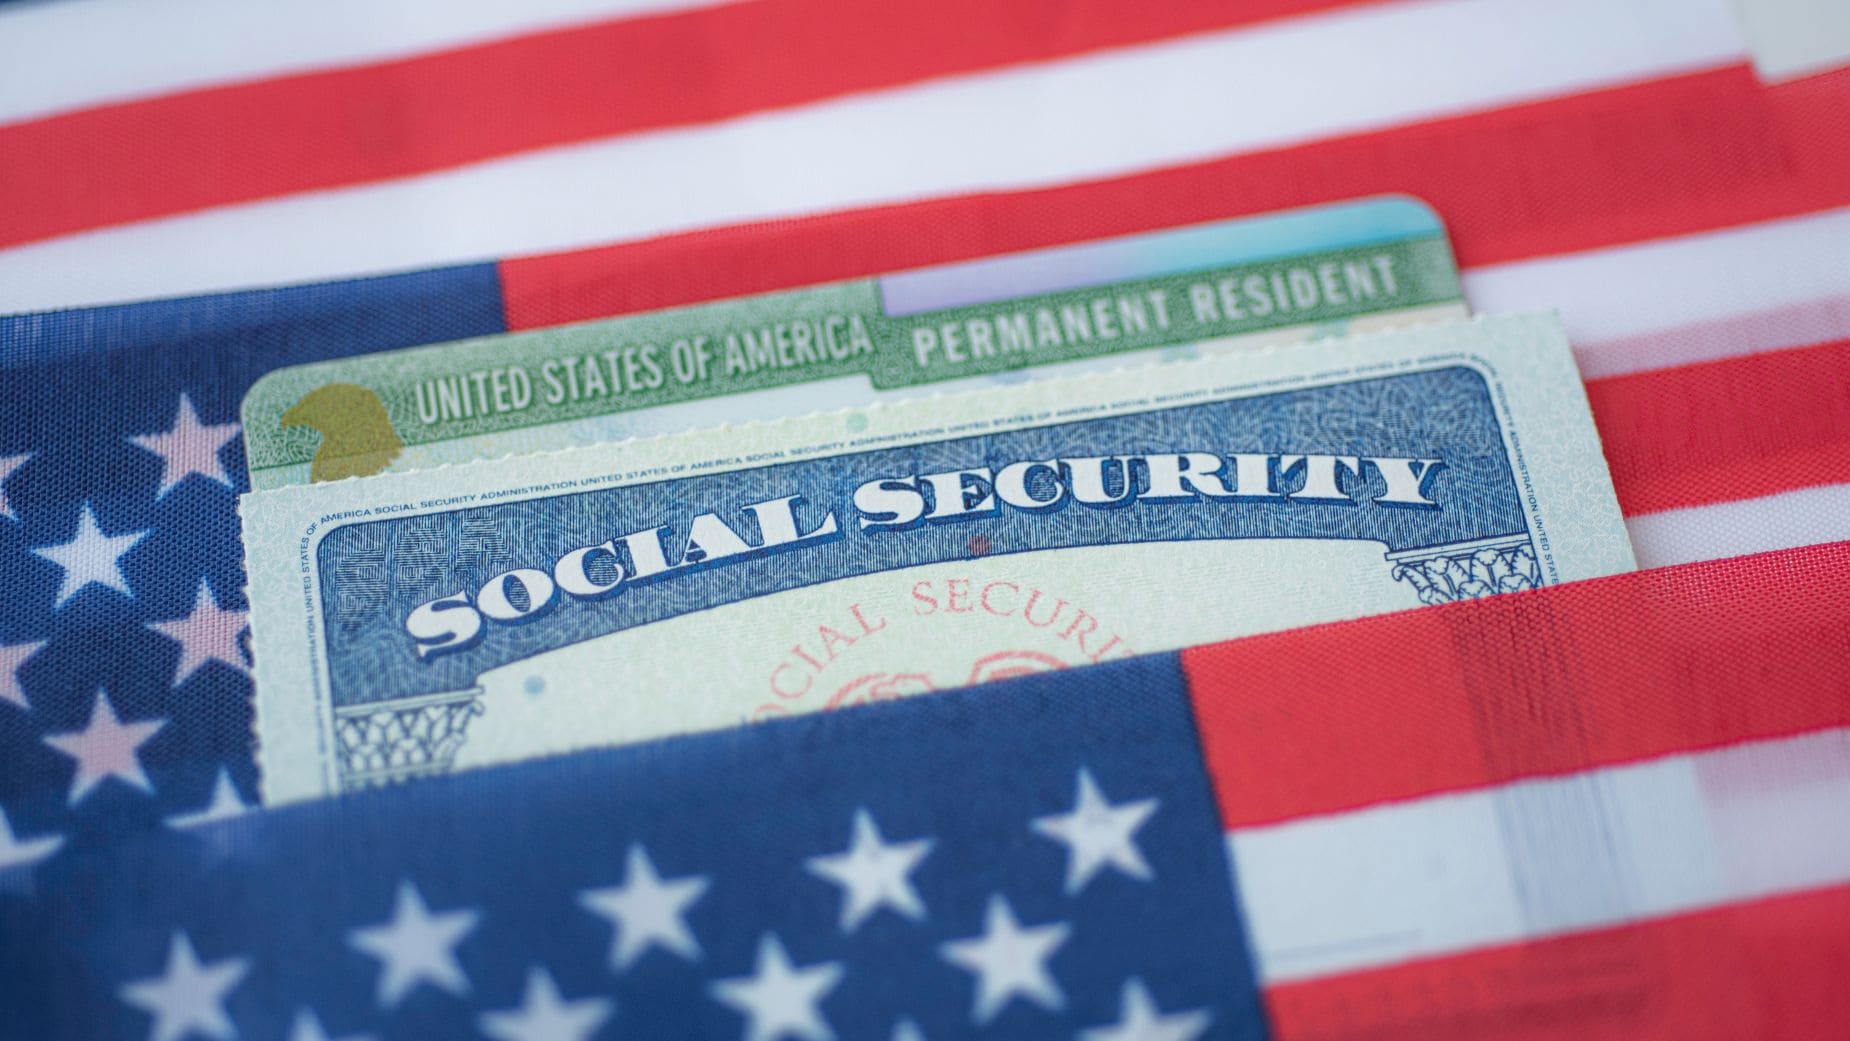 Americans under certain conditions could get a payment of 943 dollars from Social Security